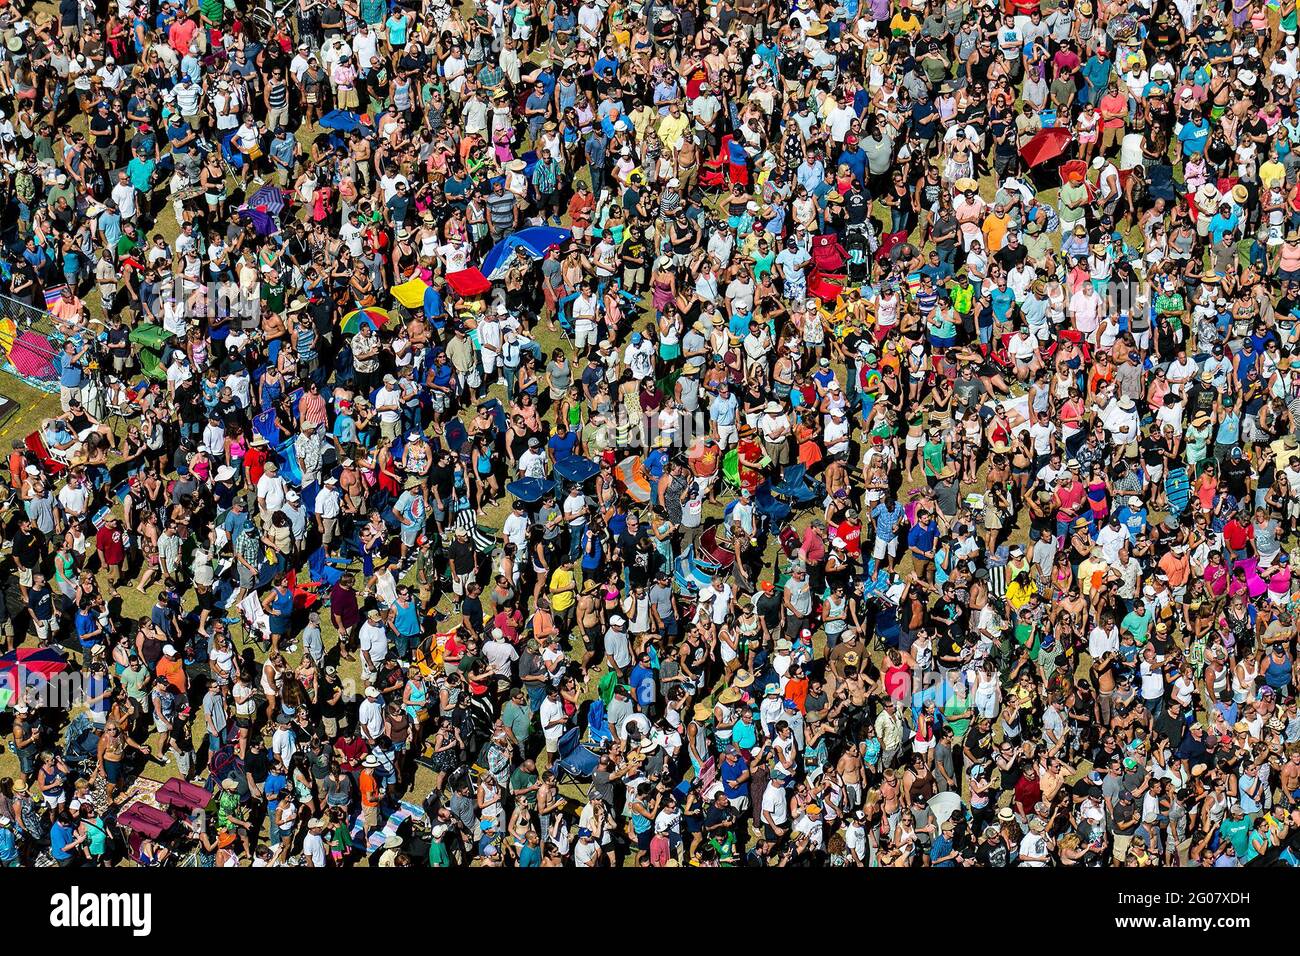 West Palm Beach, Florida, USA. 5th May, 2014. People watch the band Blues Traveler perform on the final day of 'Sunfest' in West Palm Beach. Credit: Greg Lovett/Palm Beach Post/ZUMA Wire/Alamy Live News Stock Photo